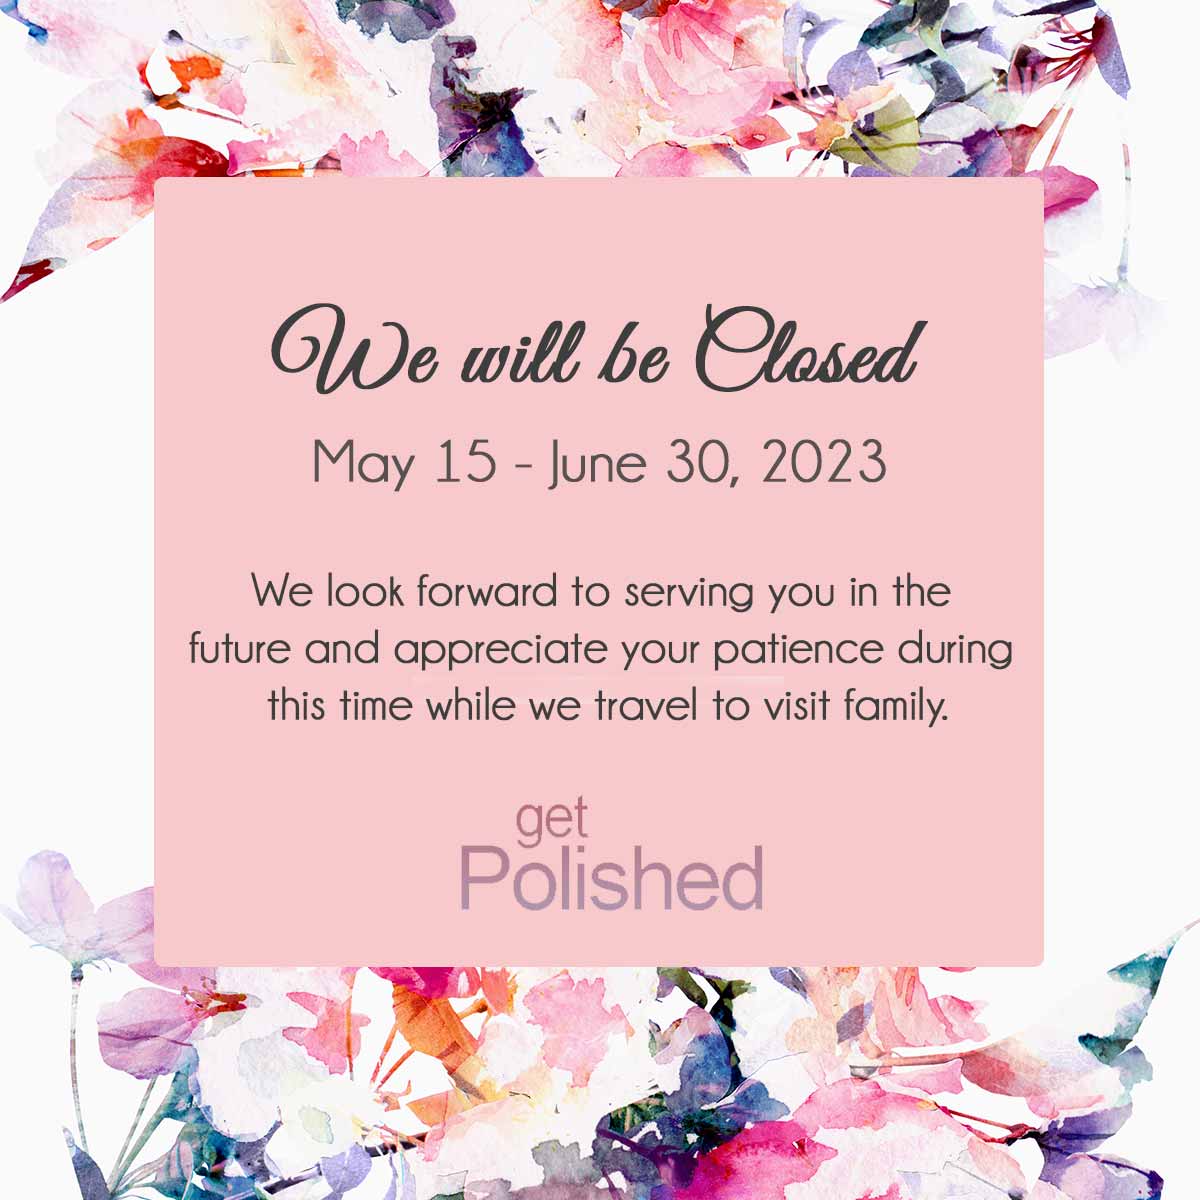 We will be closed May 15-June 30, 2023